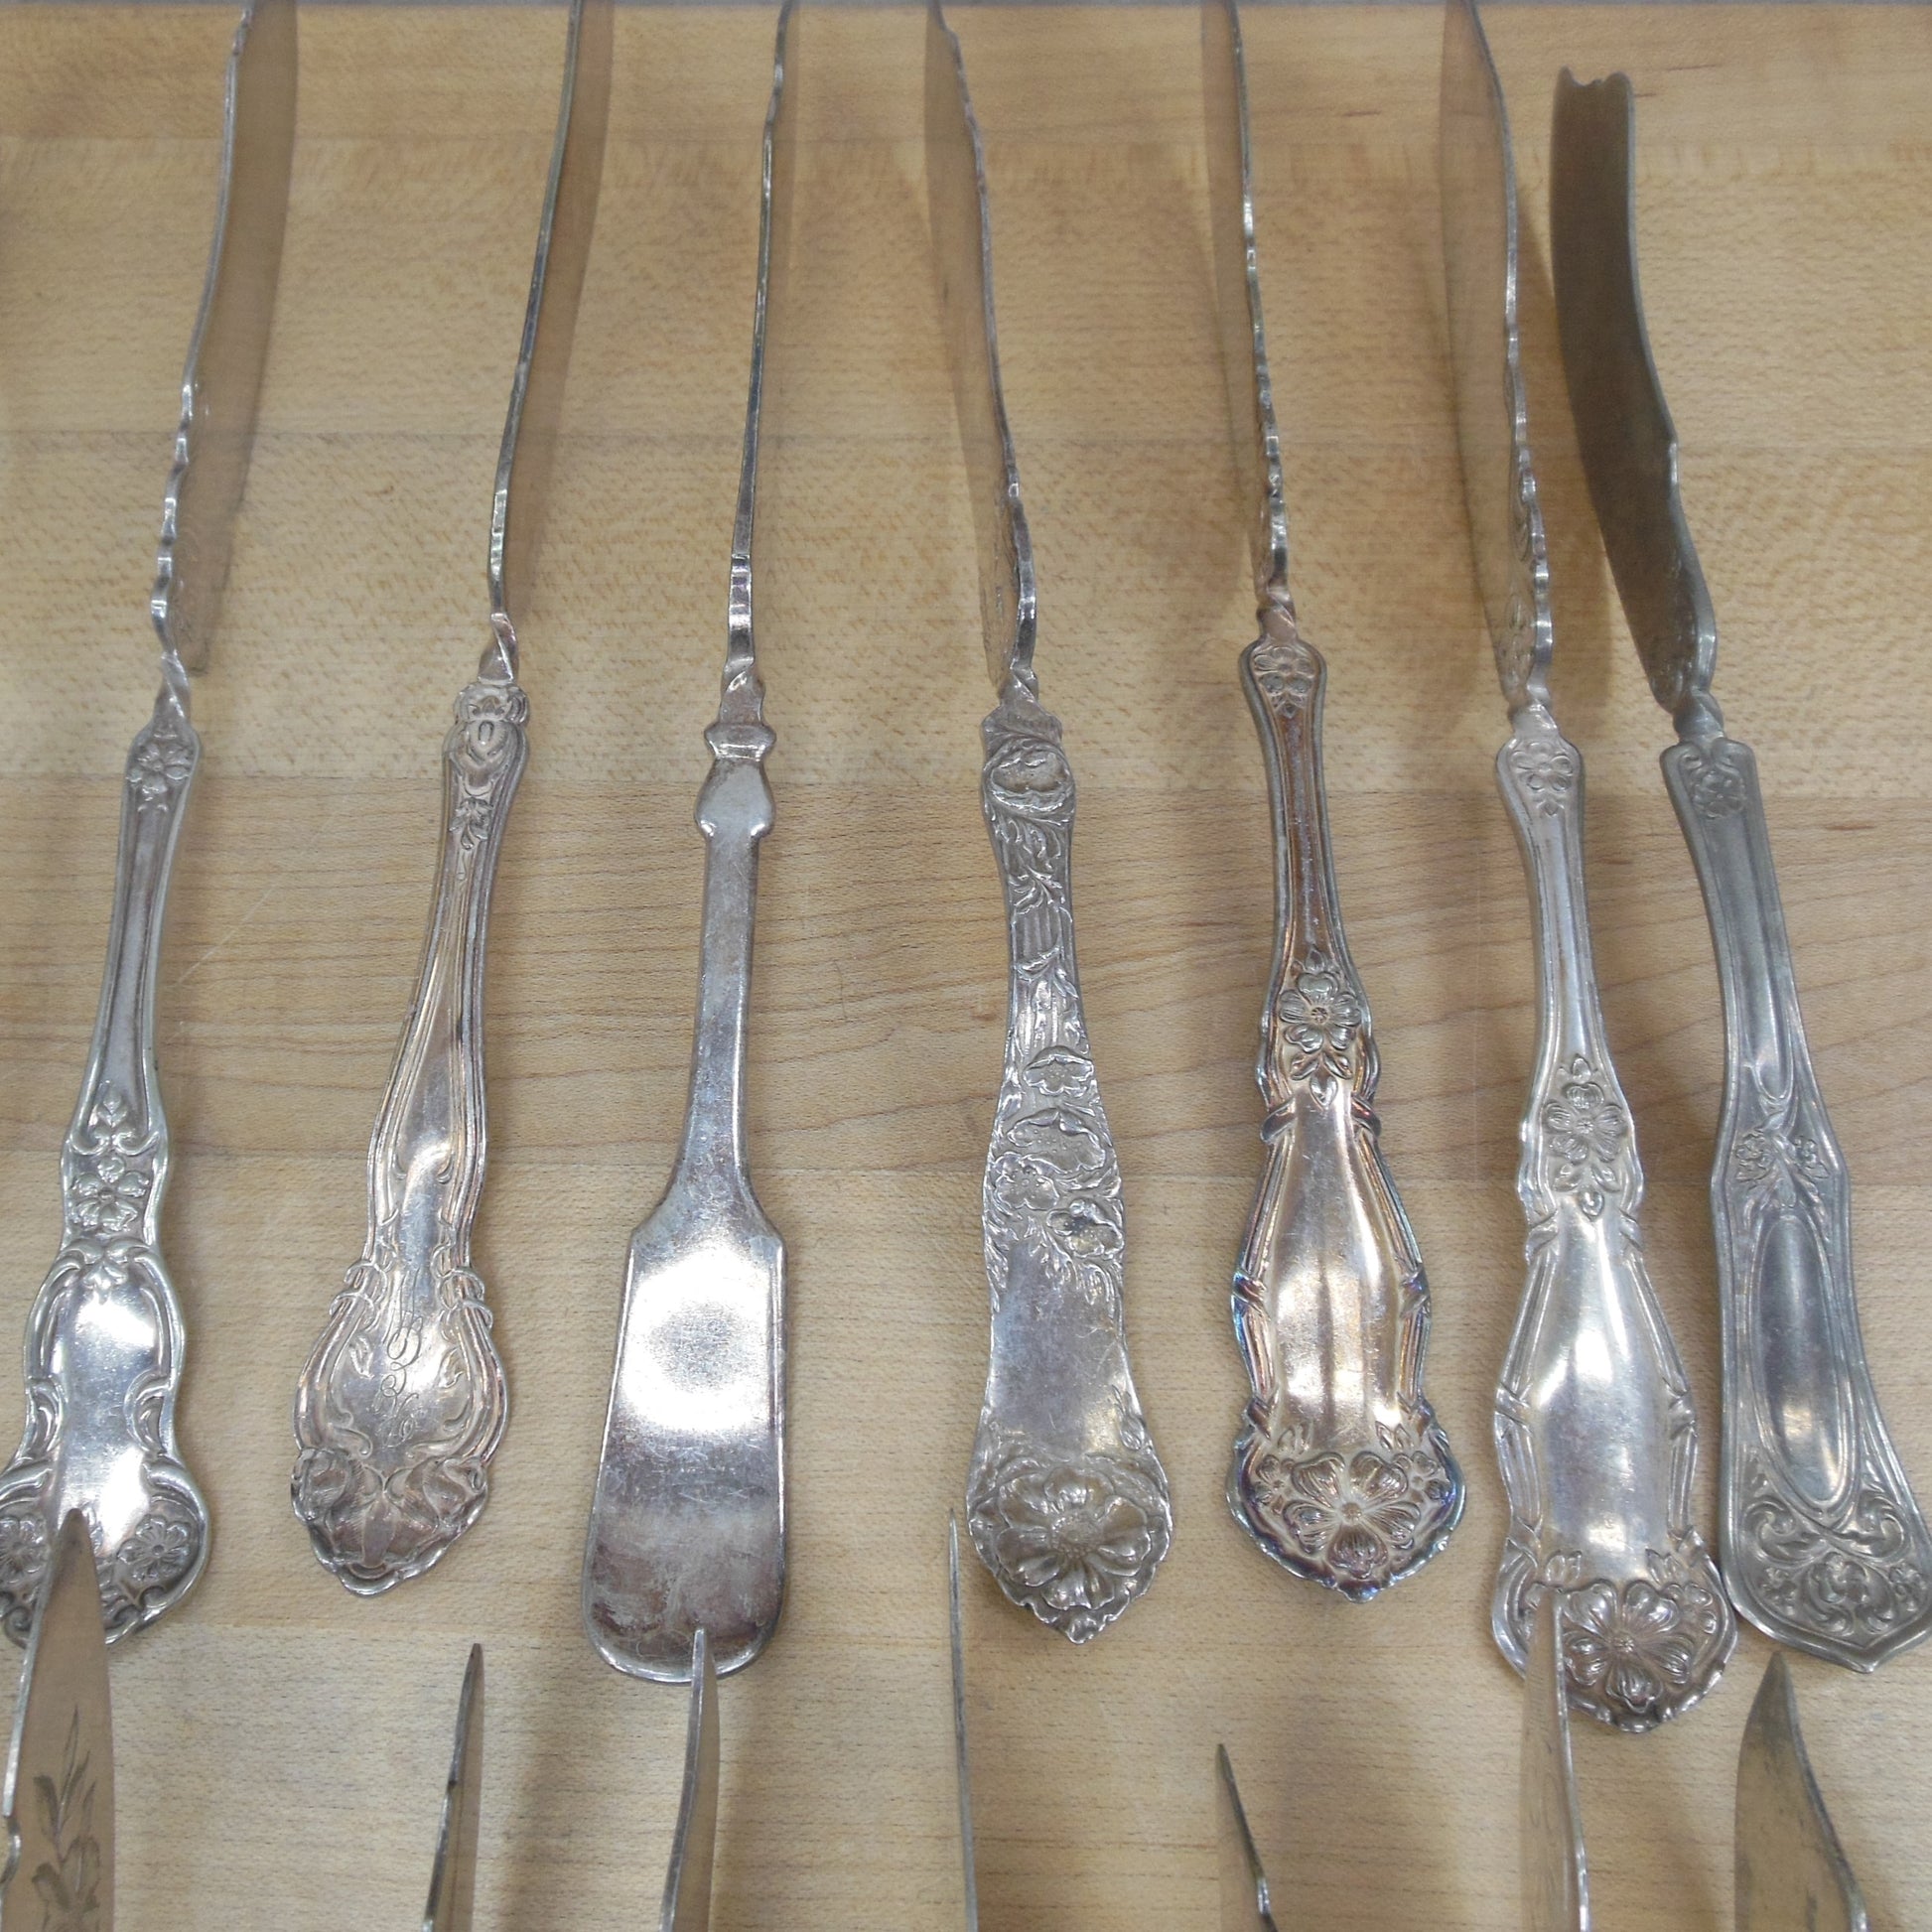 Antique Mixed Master Collection 33 Silverplate Master Butter Knives Twist lot